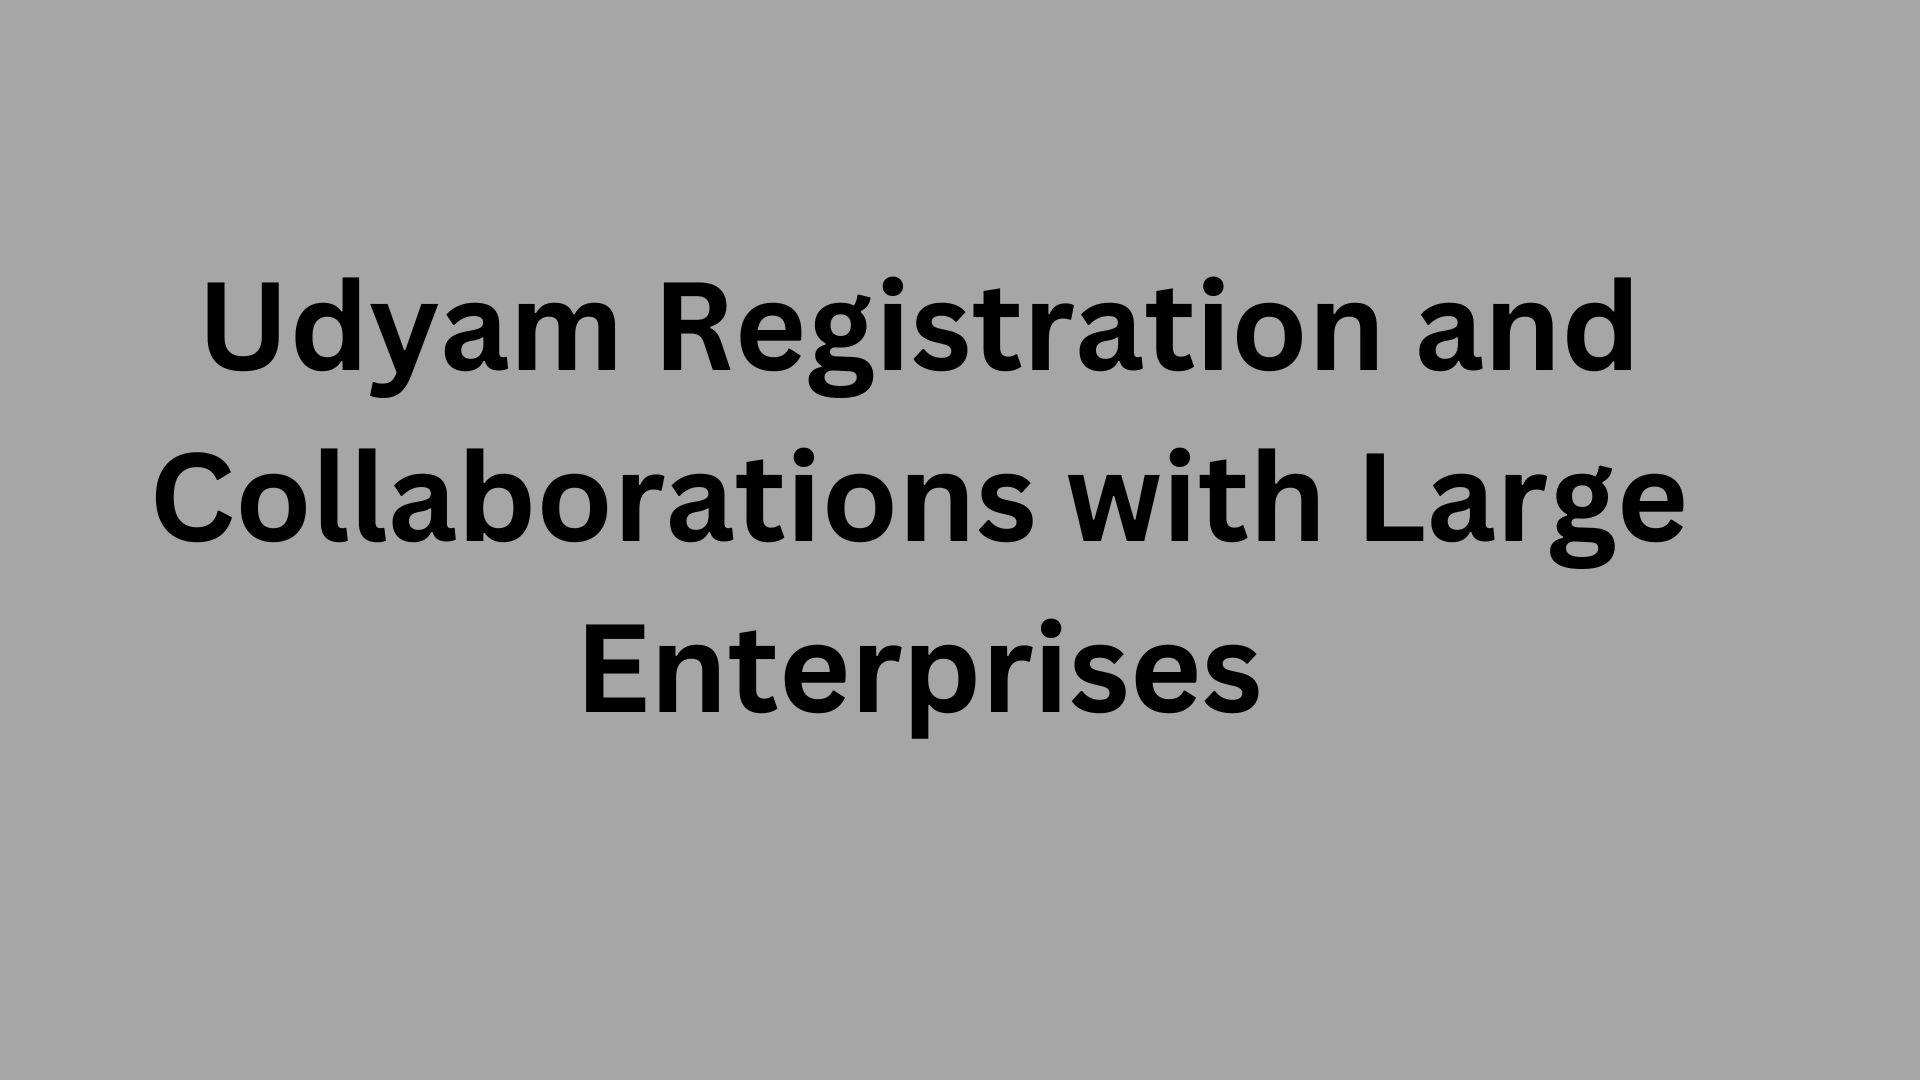 Udyam Registration and Collaborations with Large Enterprises